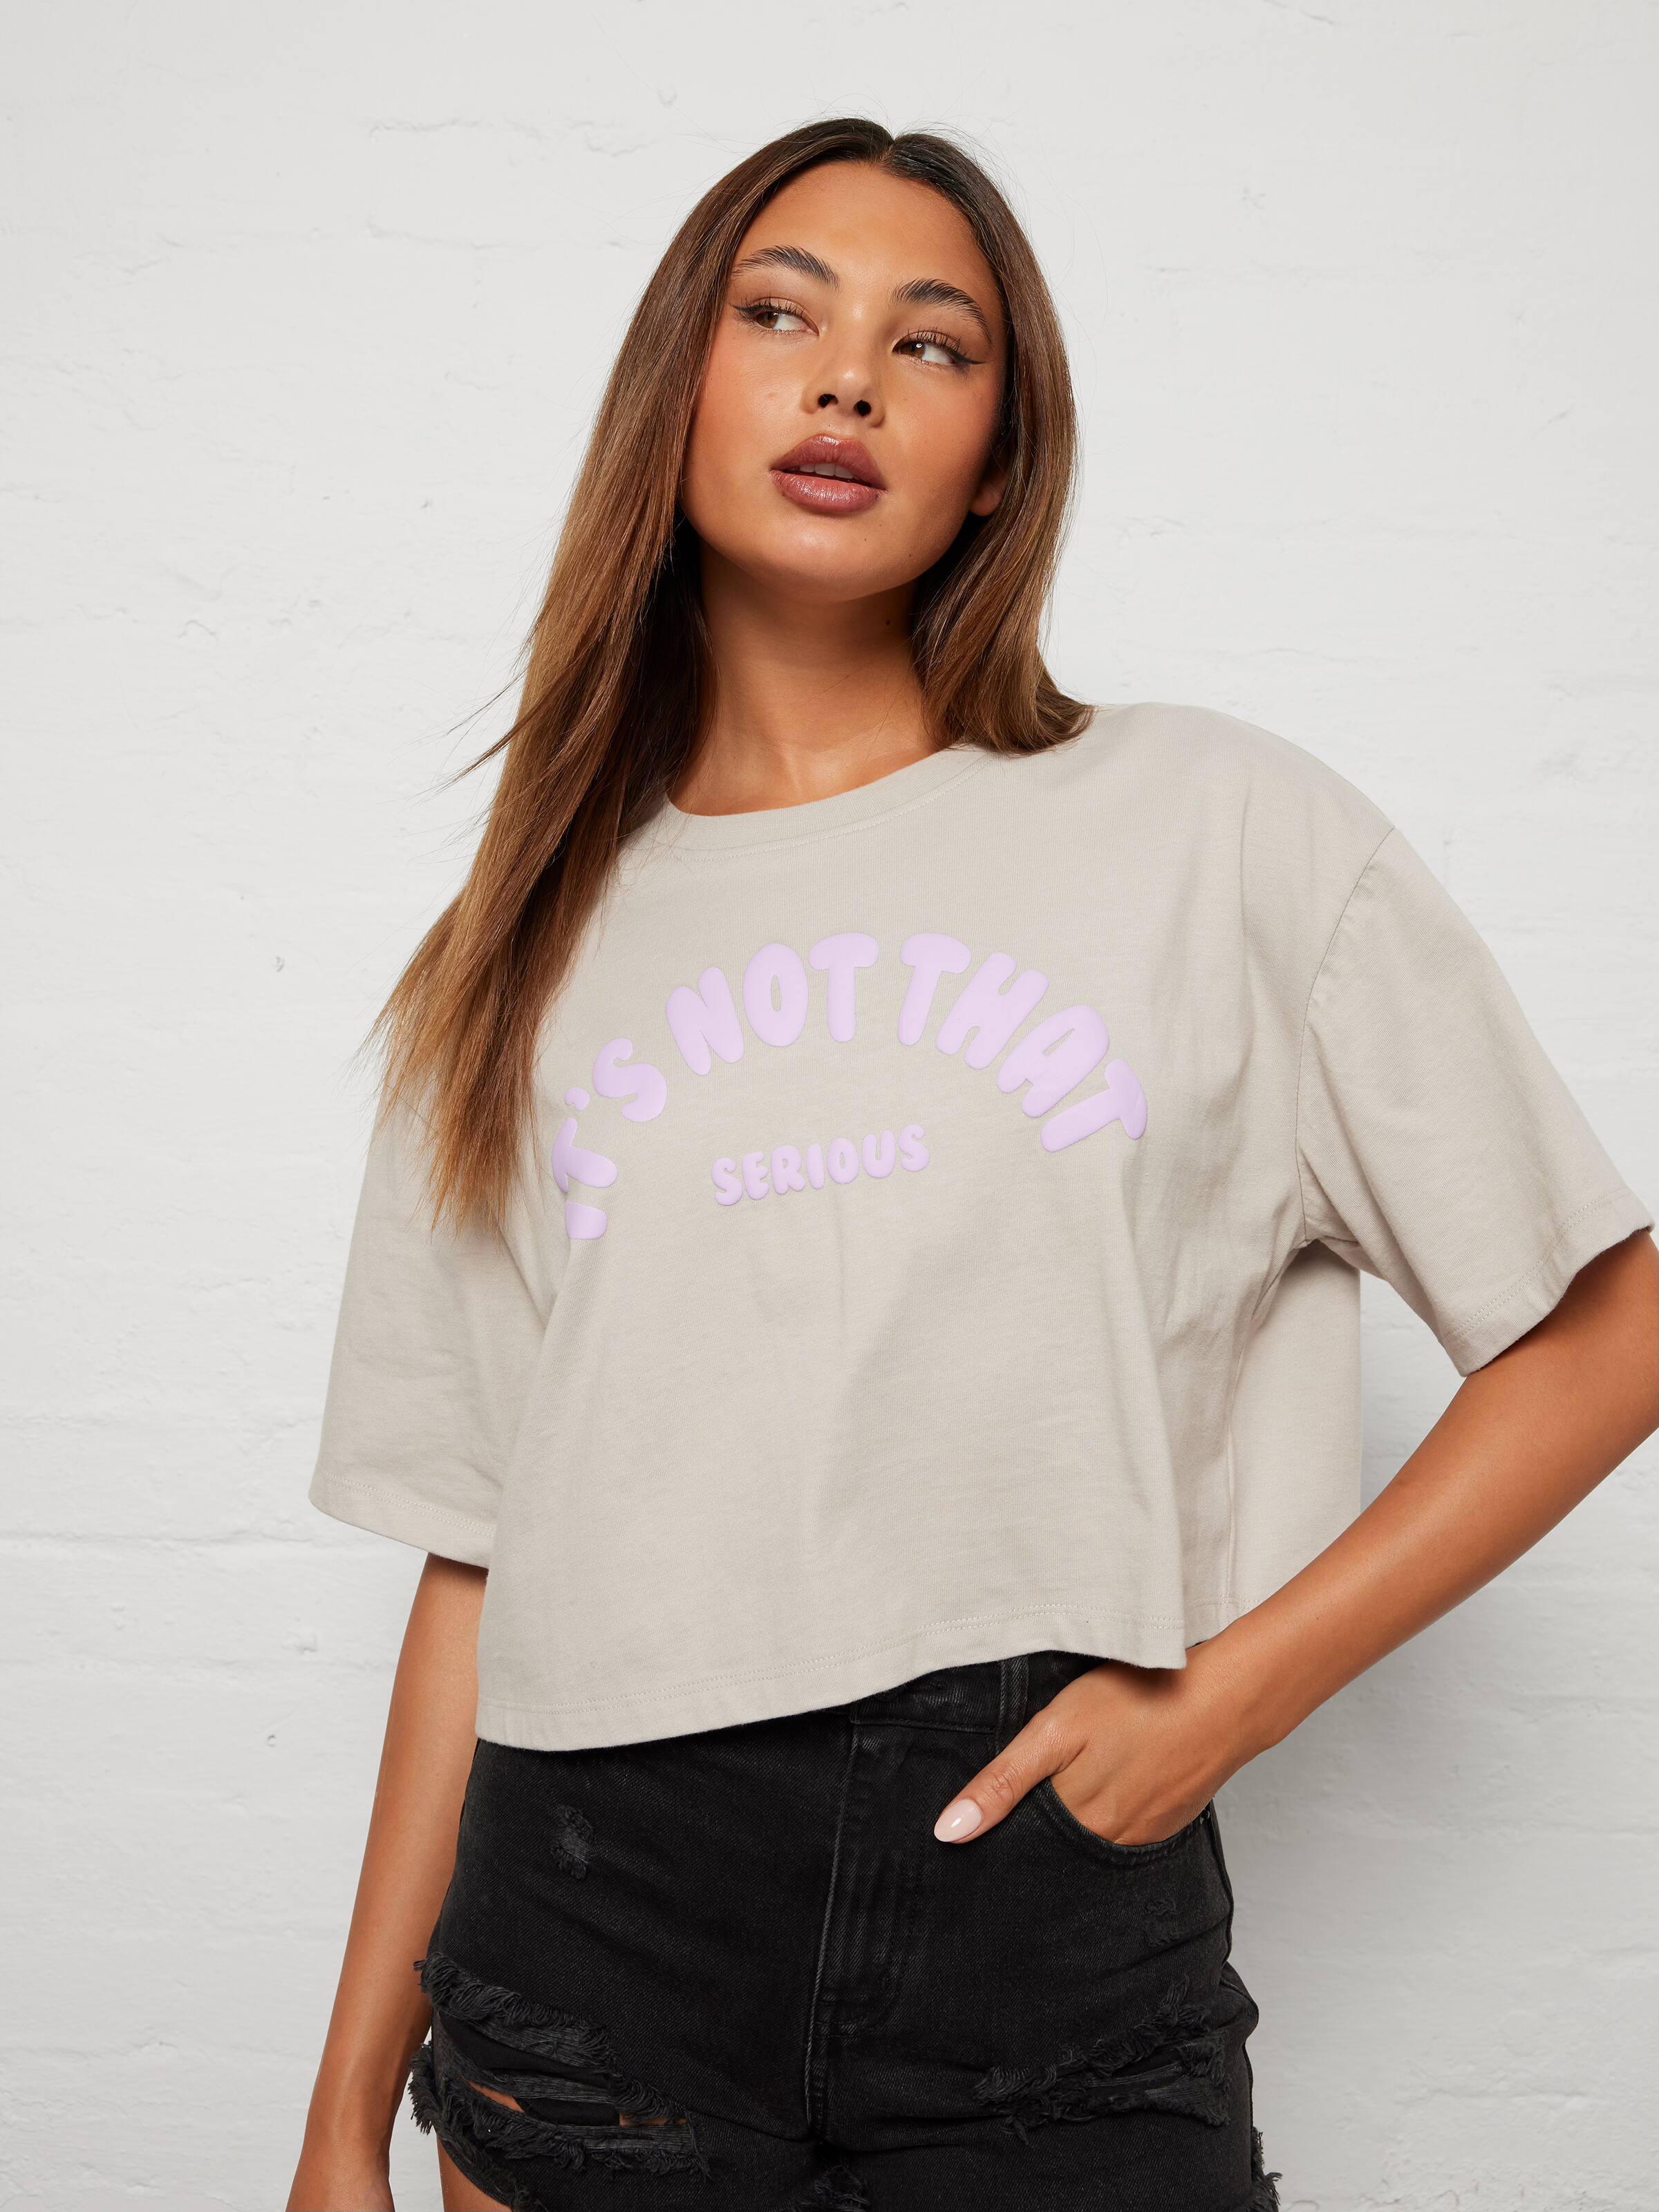 Not That Serious Puff Oversized Crop Tee